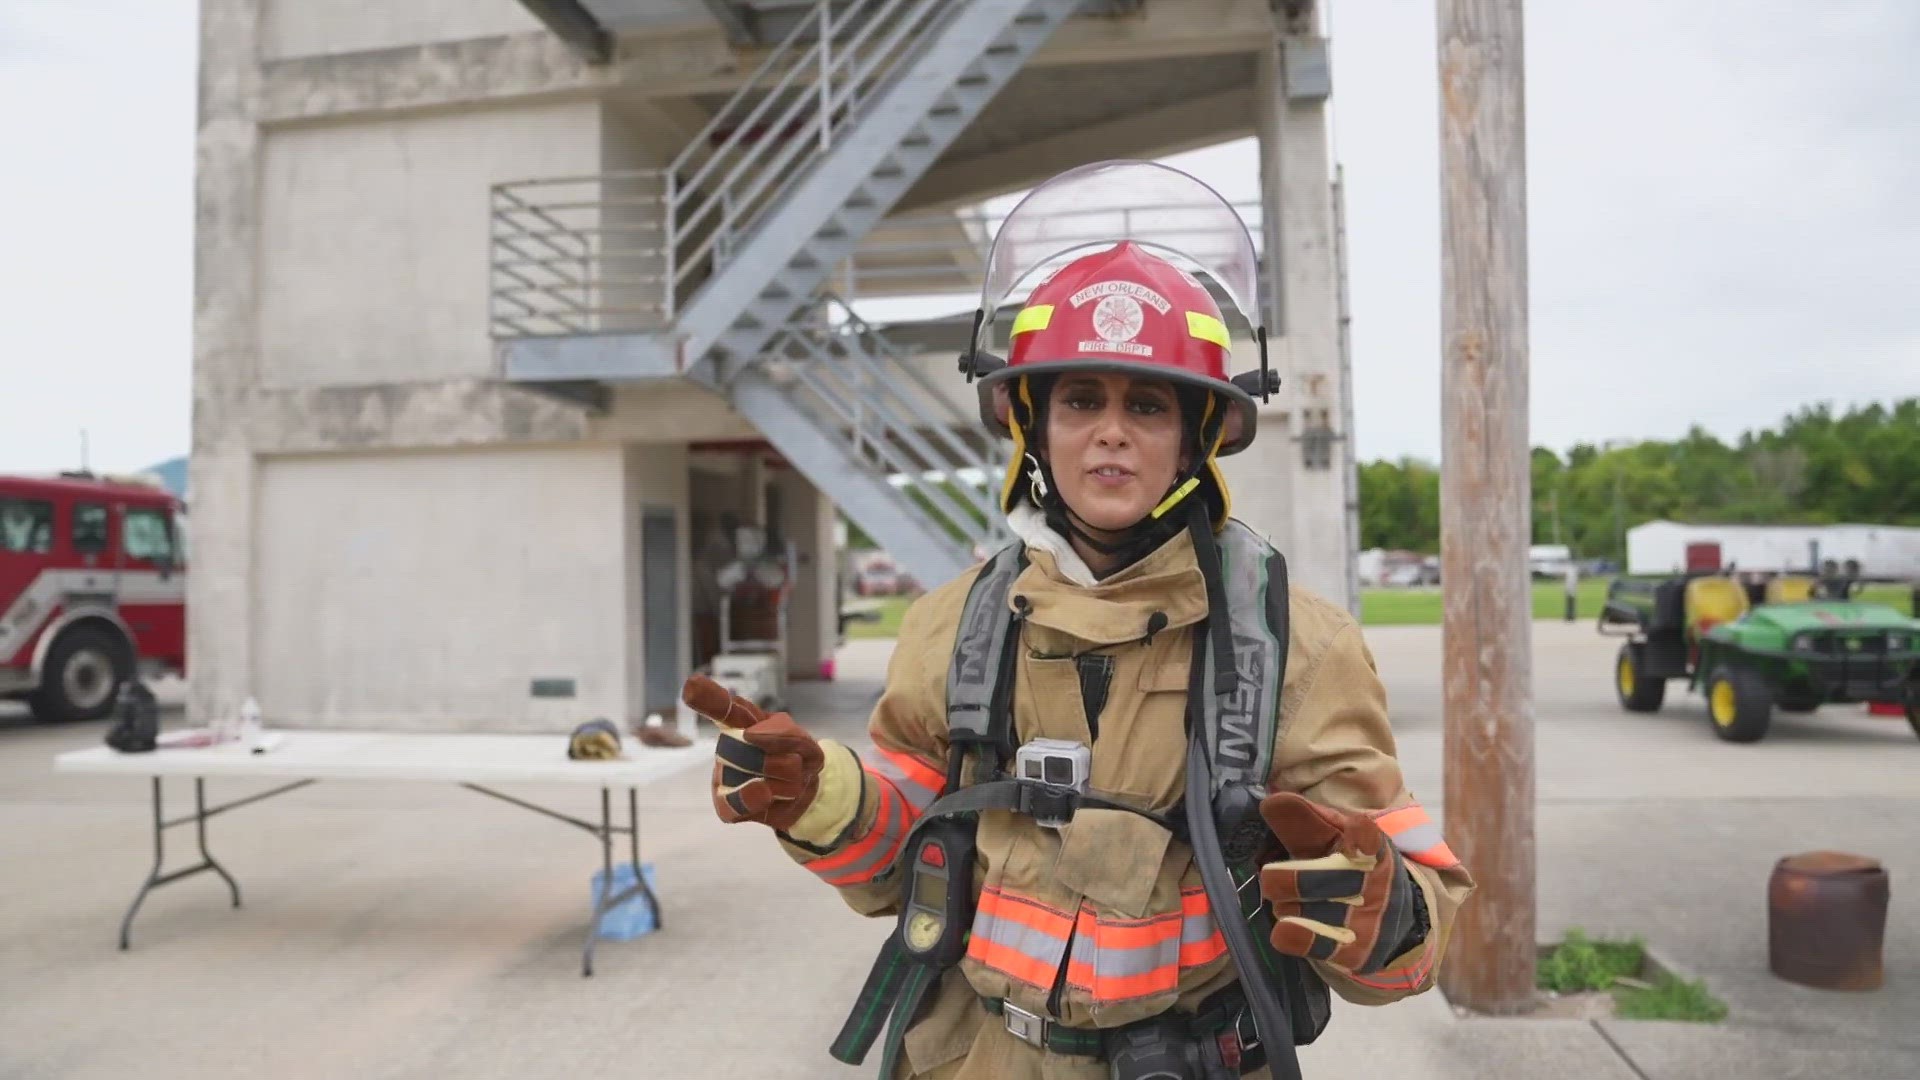 Imagine being a firefighter during a Louisiana summer. Reporter Eleanor Tabone was put to the test to find out just hard it is.